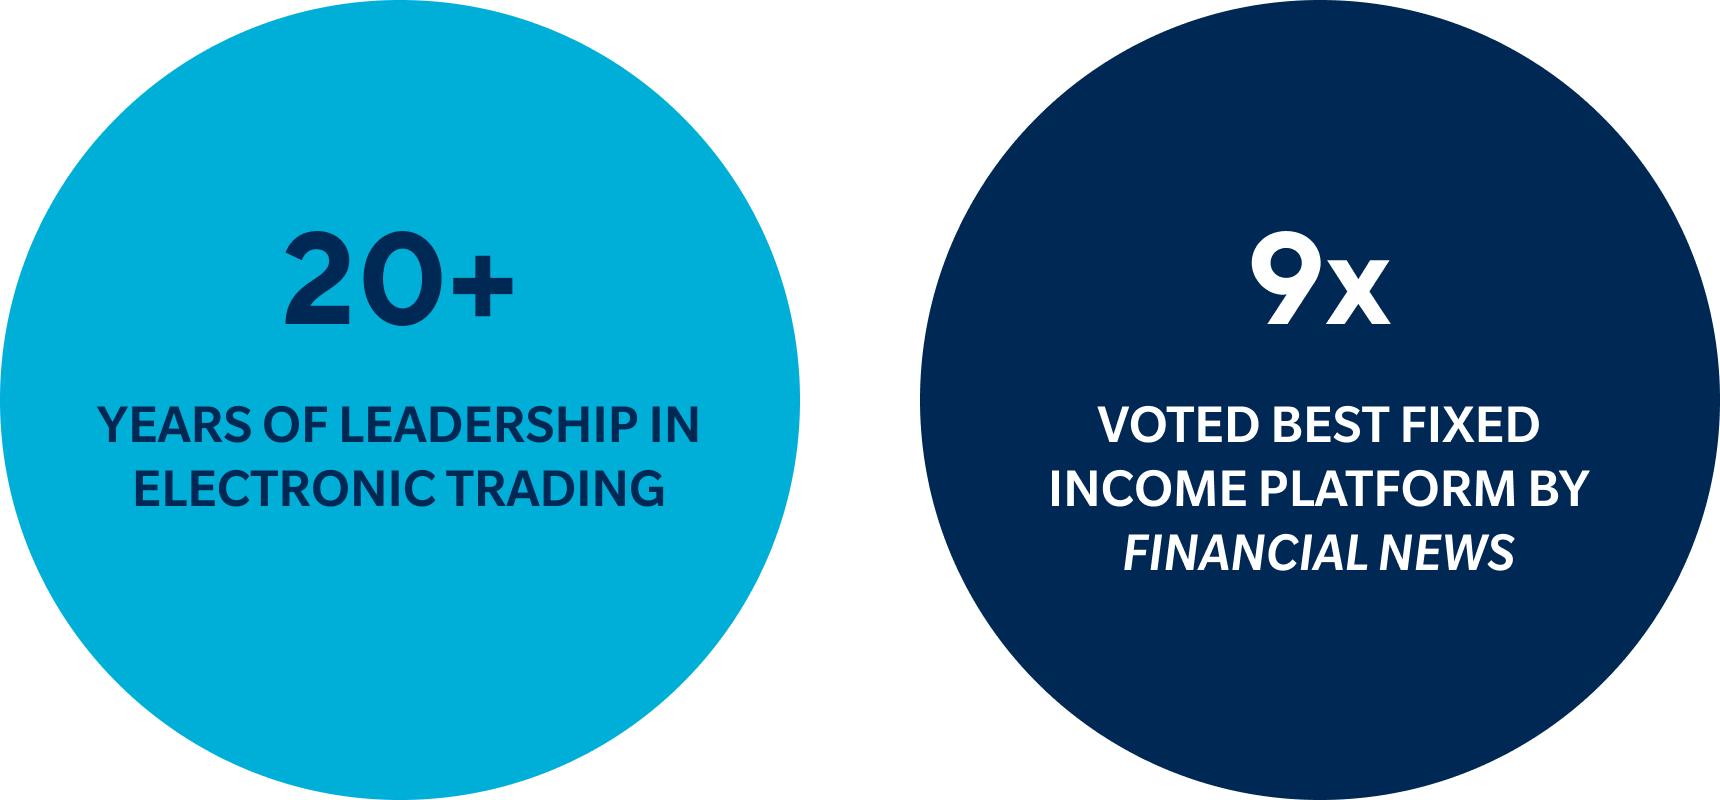 20+ years of leadership in electronic trading. 9x voted best fixed income platform by Financial News.